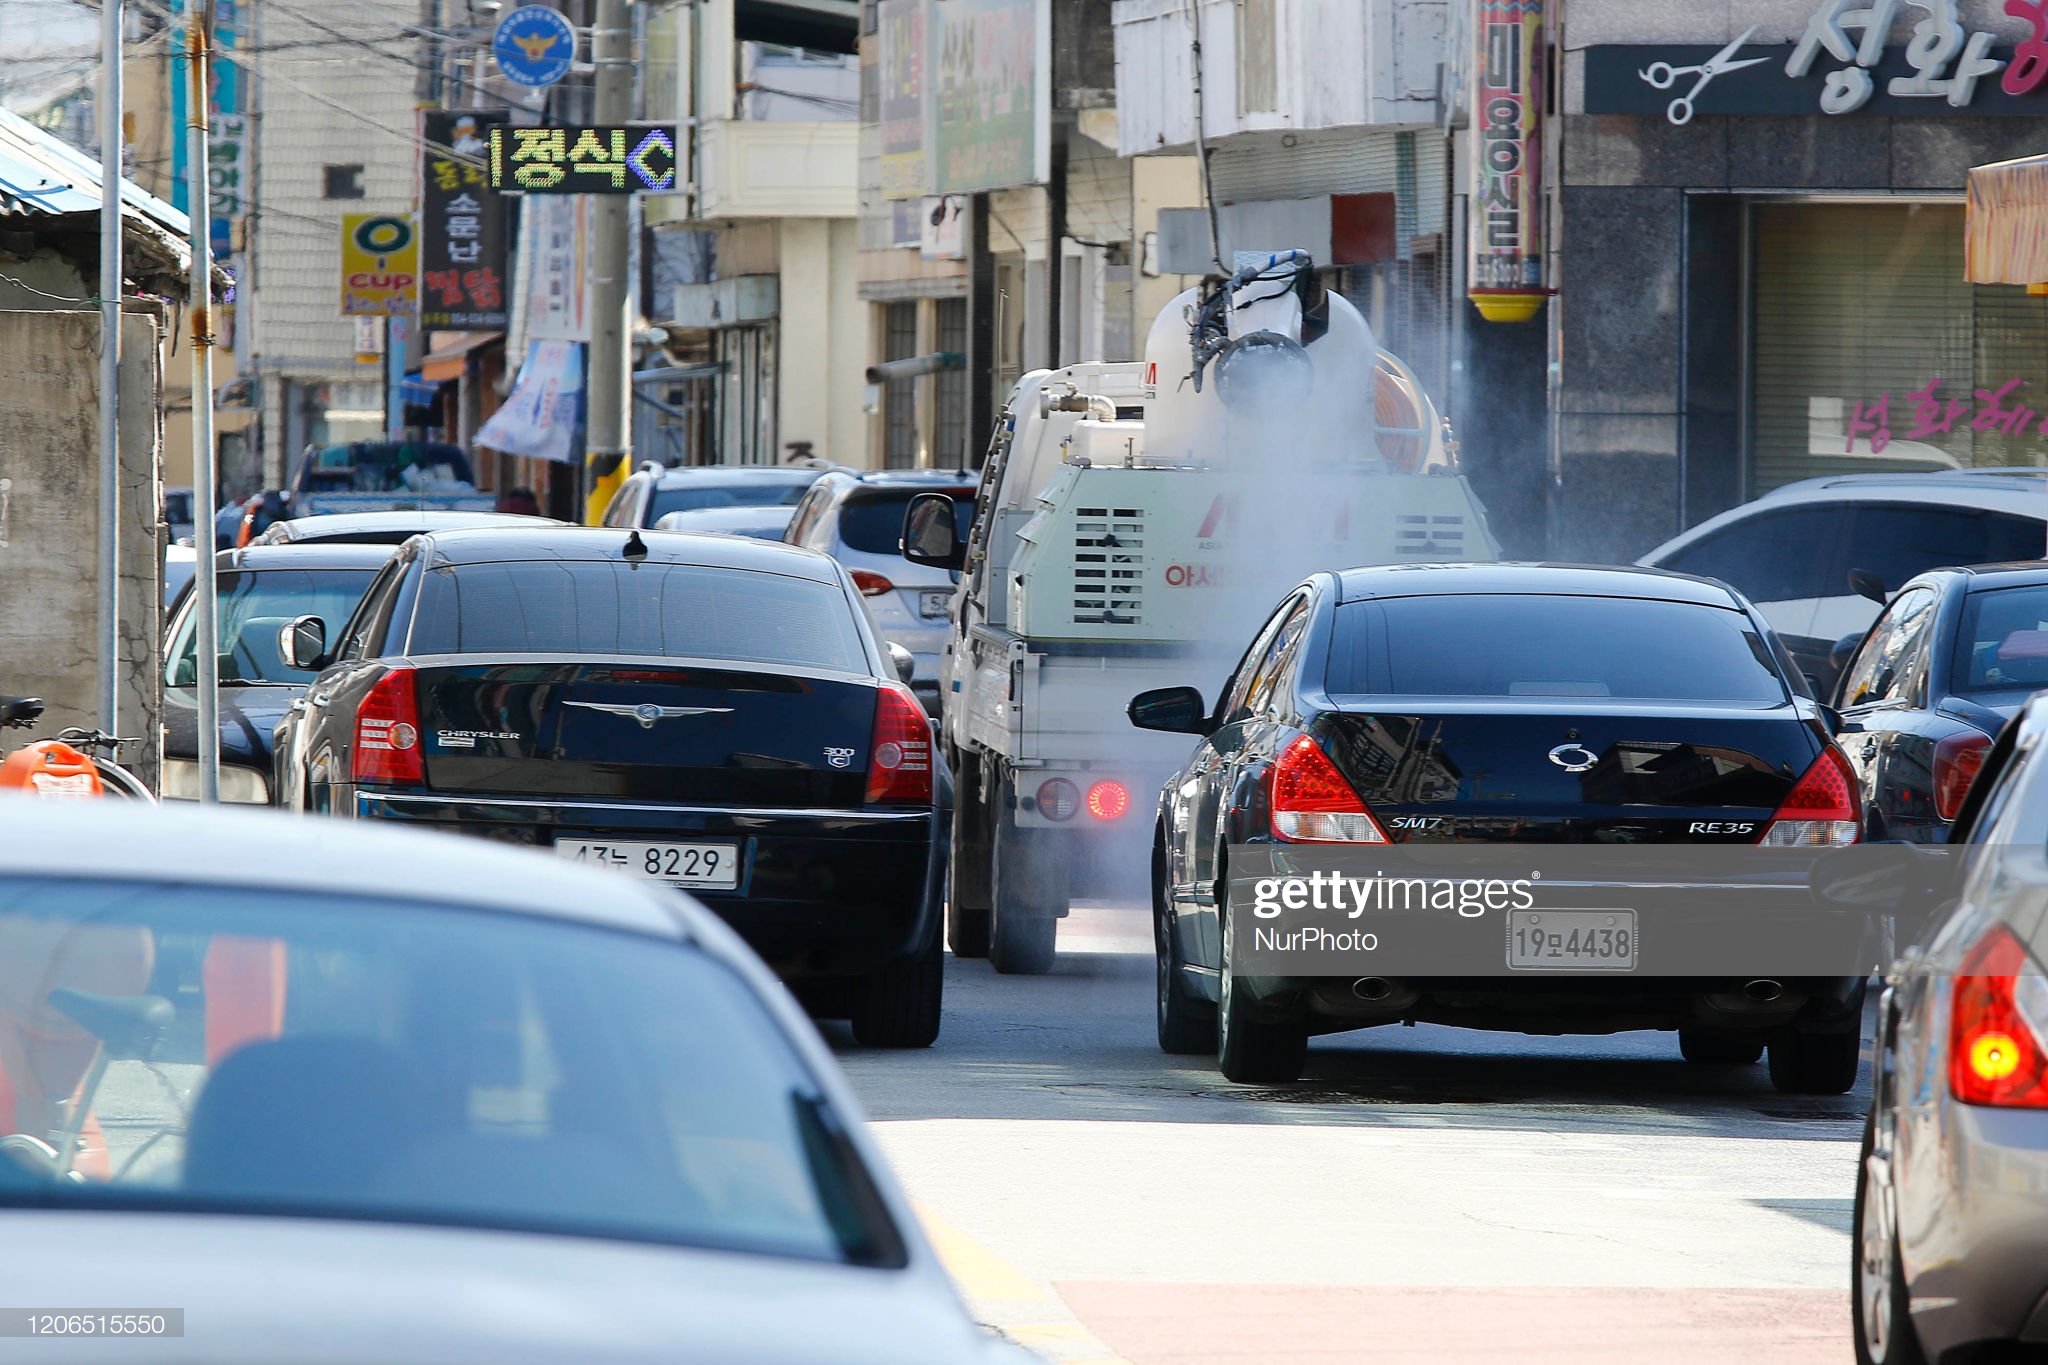 local-government-vehicle-desinfection-to-district-at-downtowns-sangju-picture-id1206515550